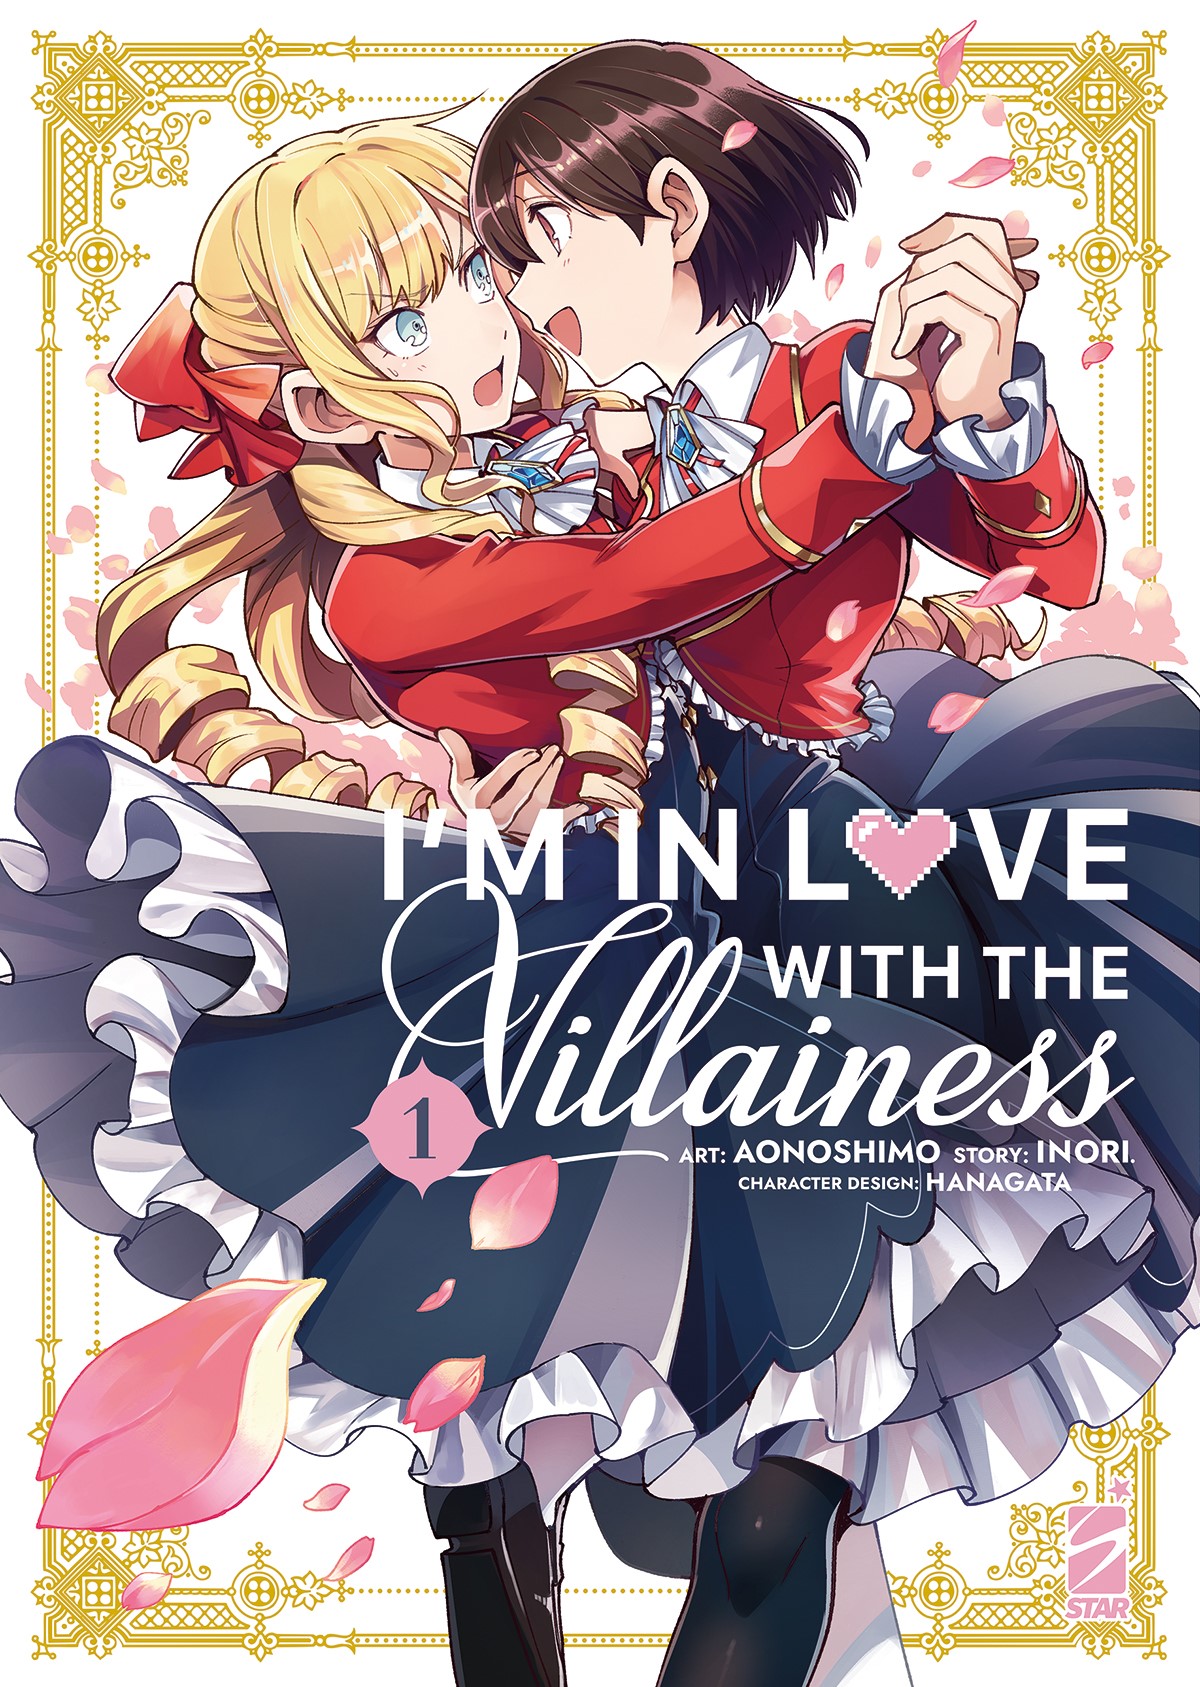 Il manga di “I’m in Love with the Villainess”